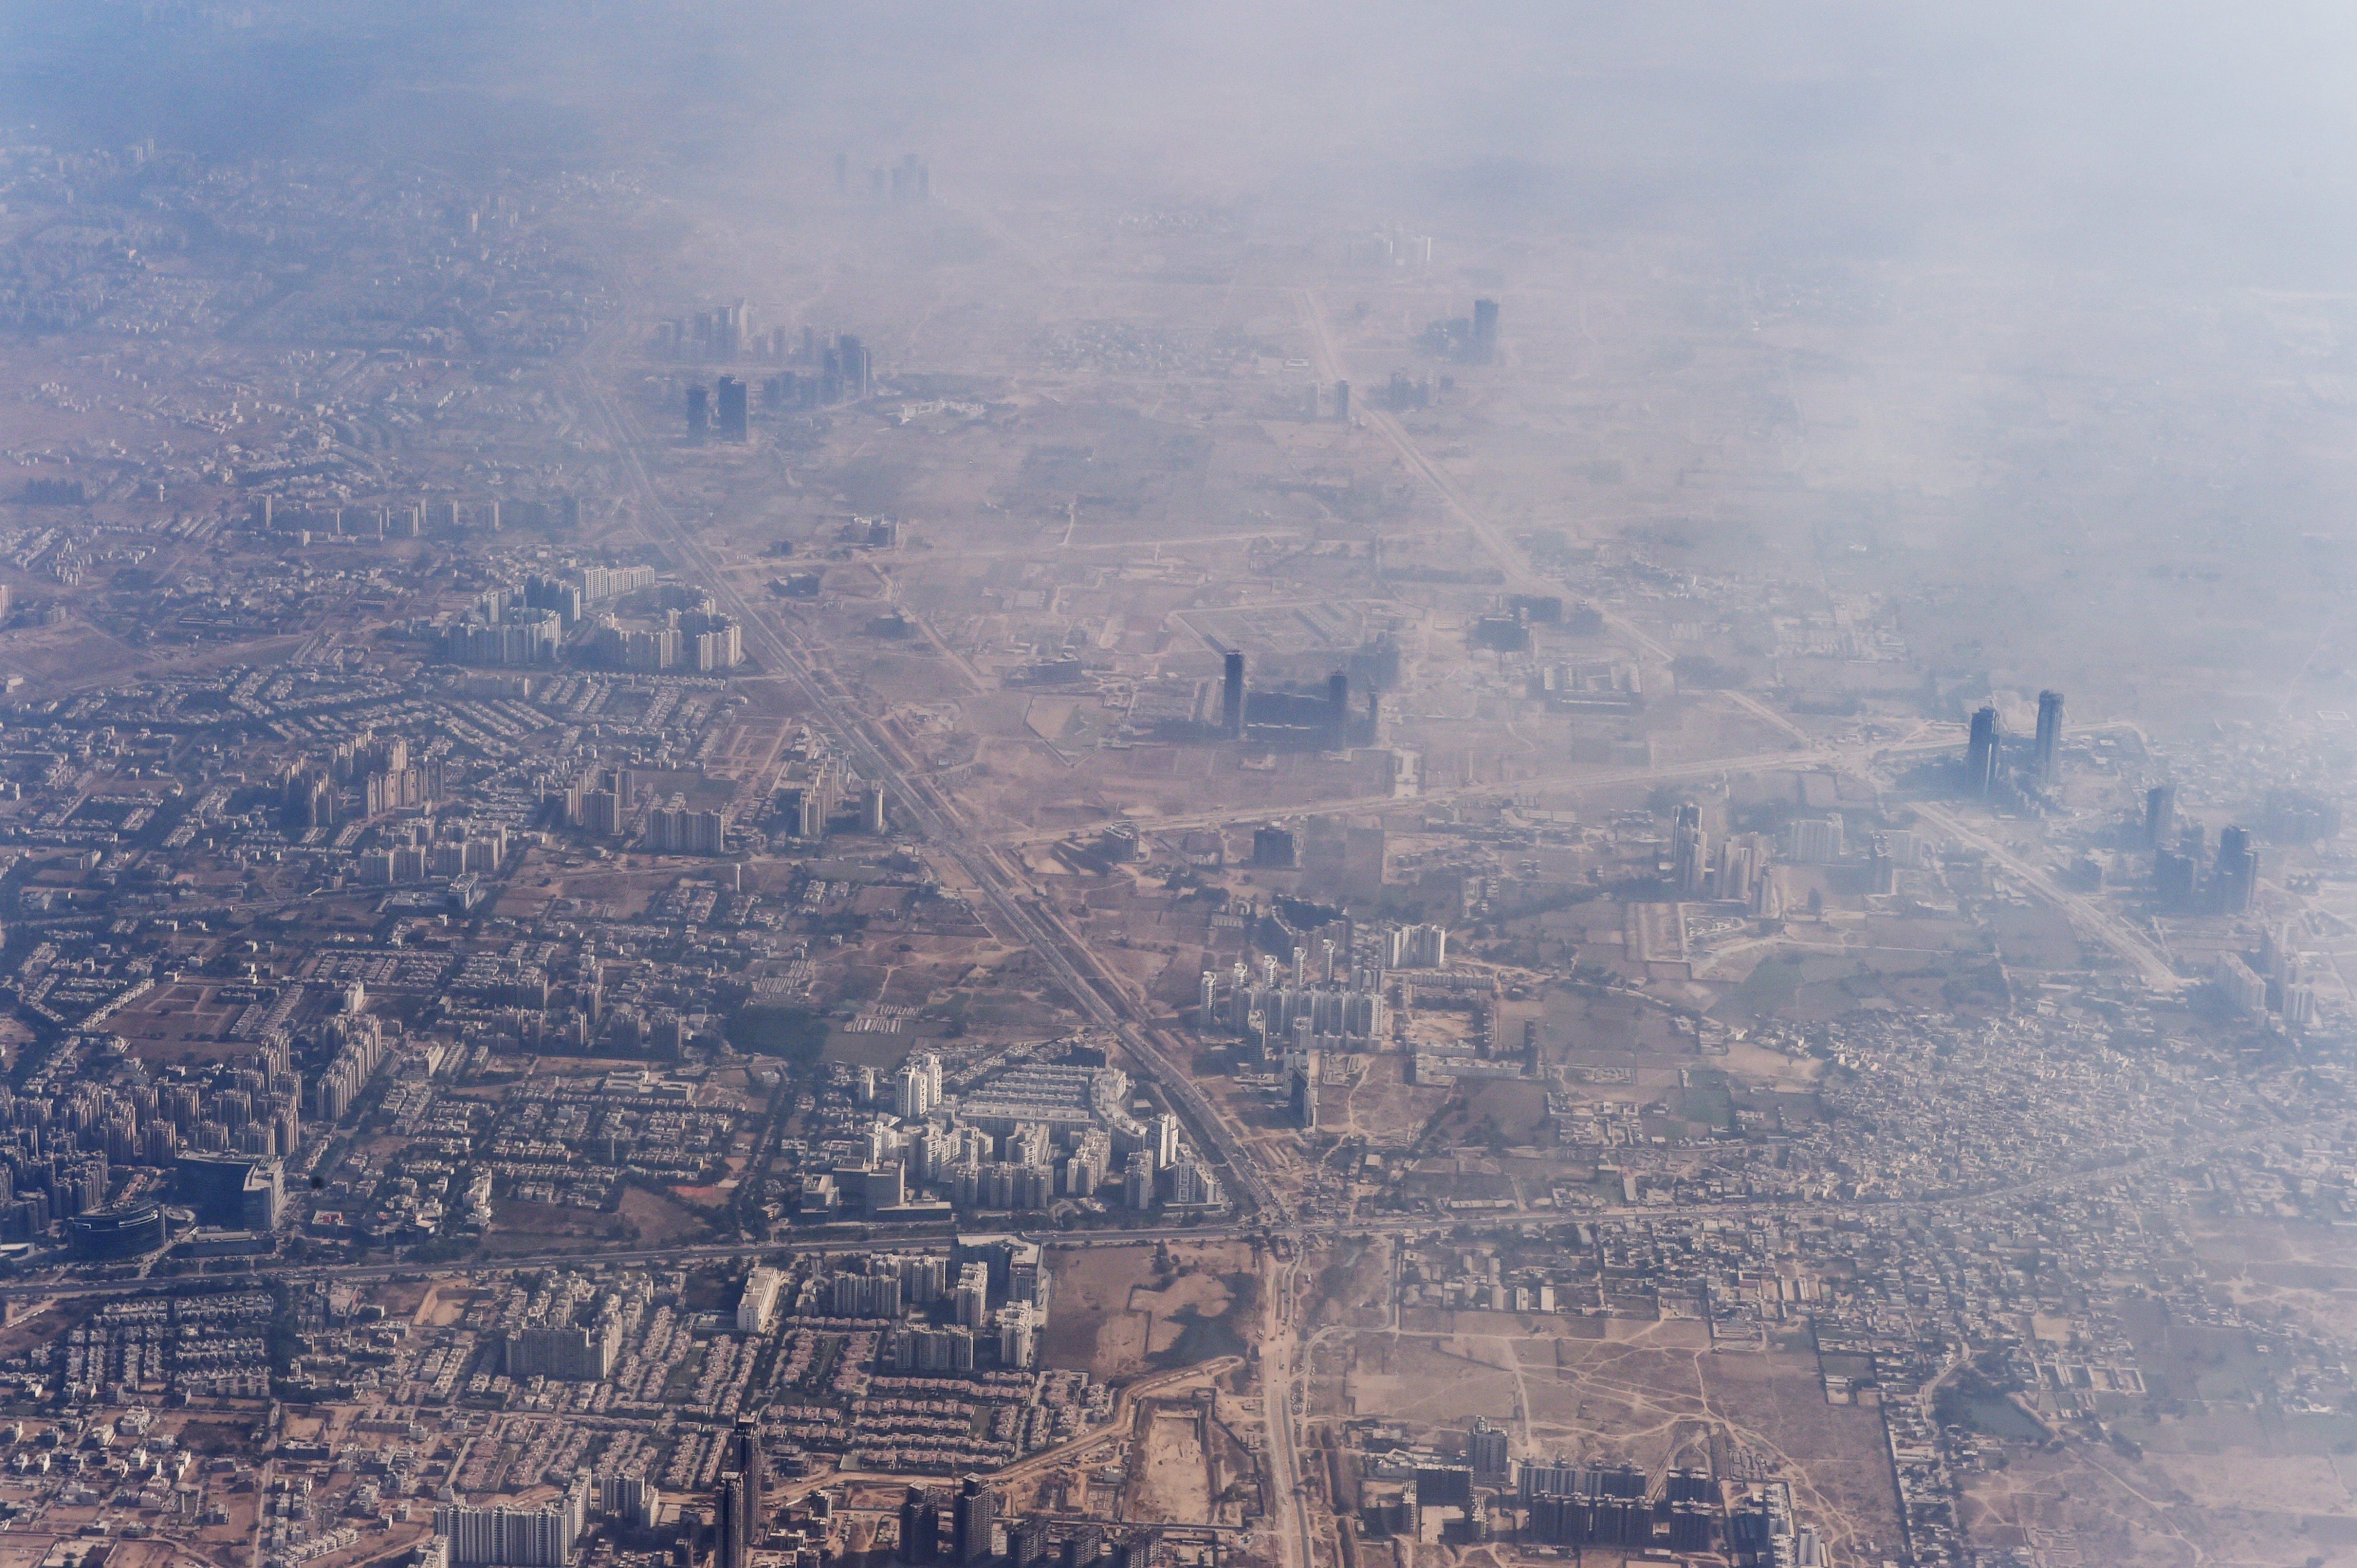 Smog envelops buildings on the outskirts of the Indian capital New Delhi on November 25, 2014. (ROBERTO SCHMIDT—AFP/Getty Images)